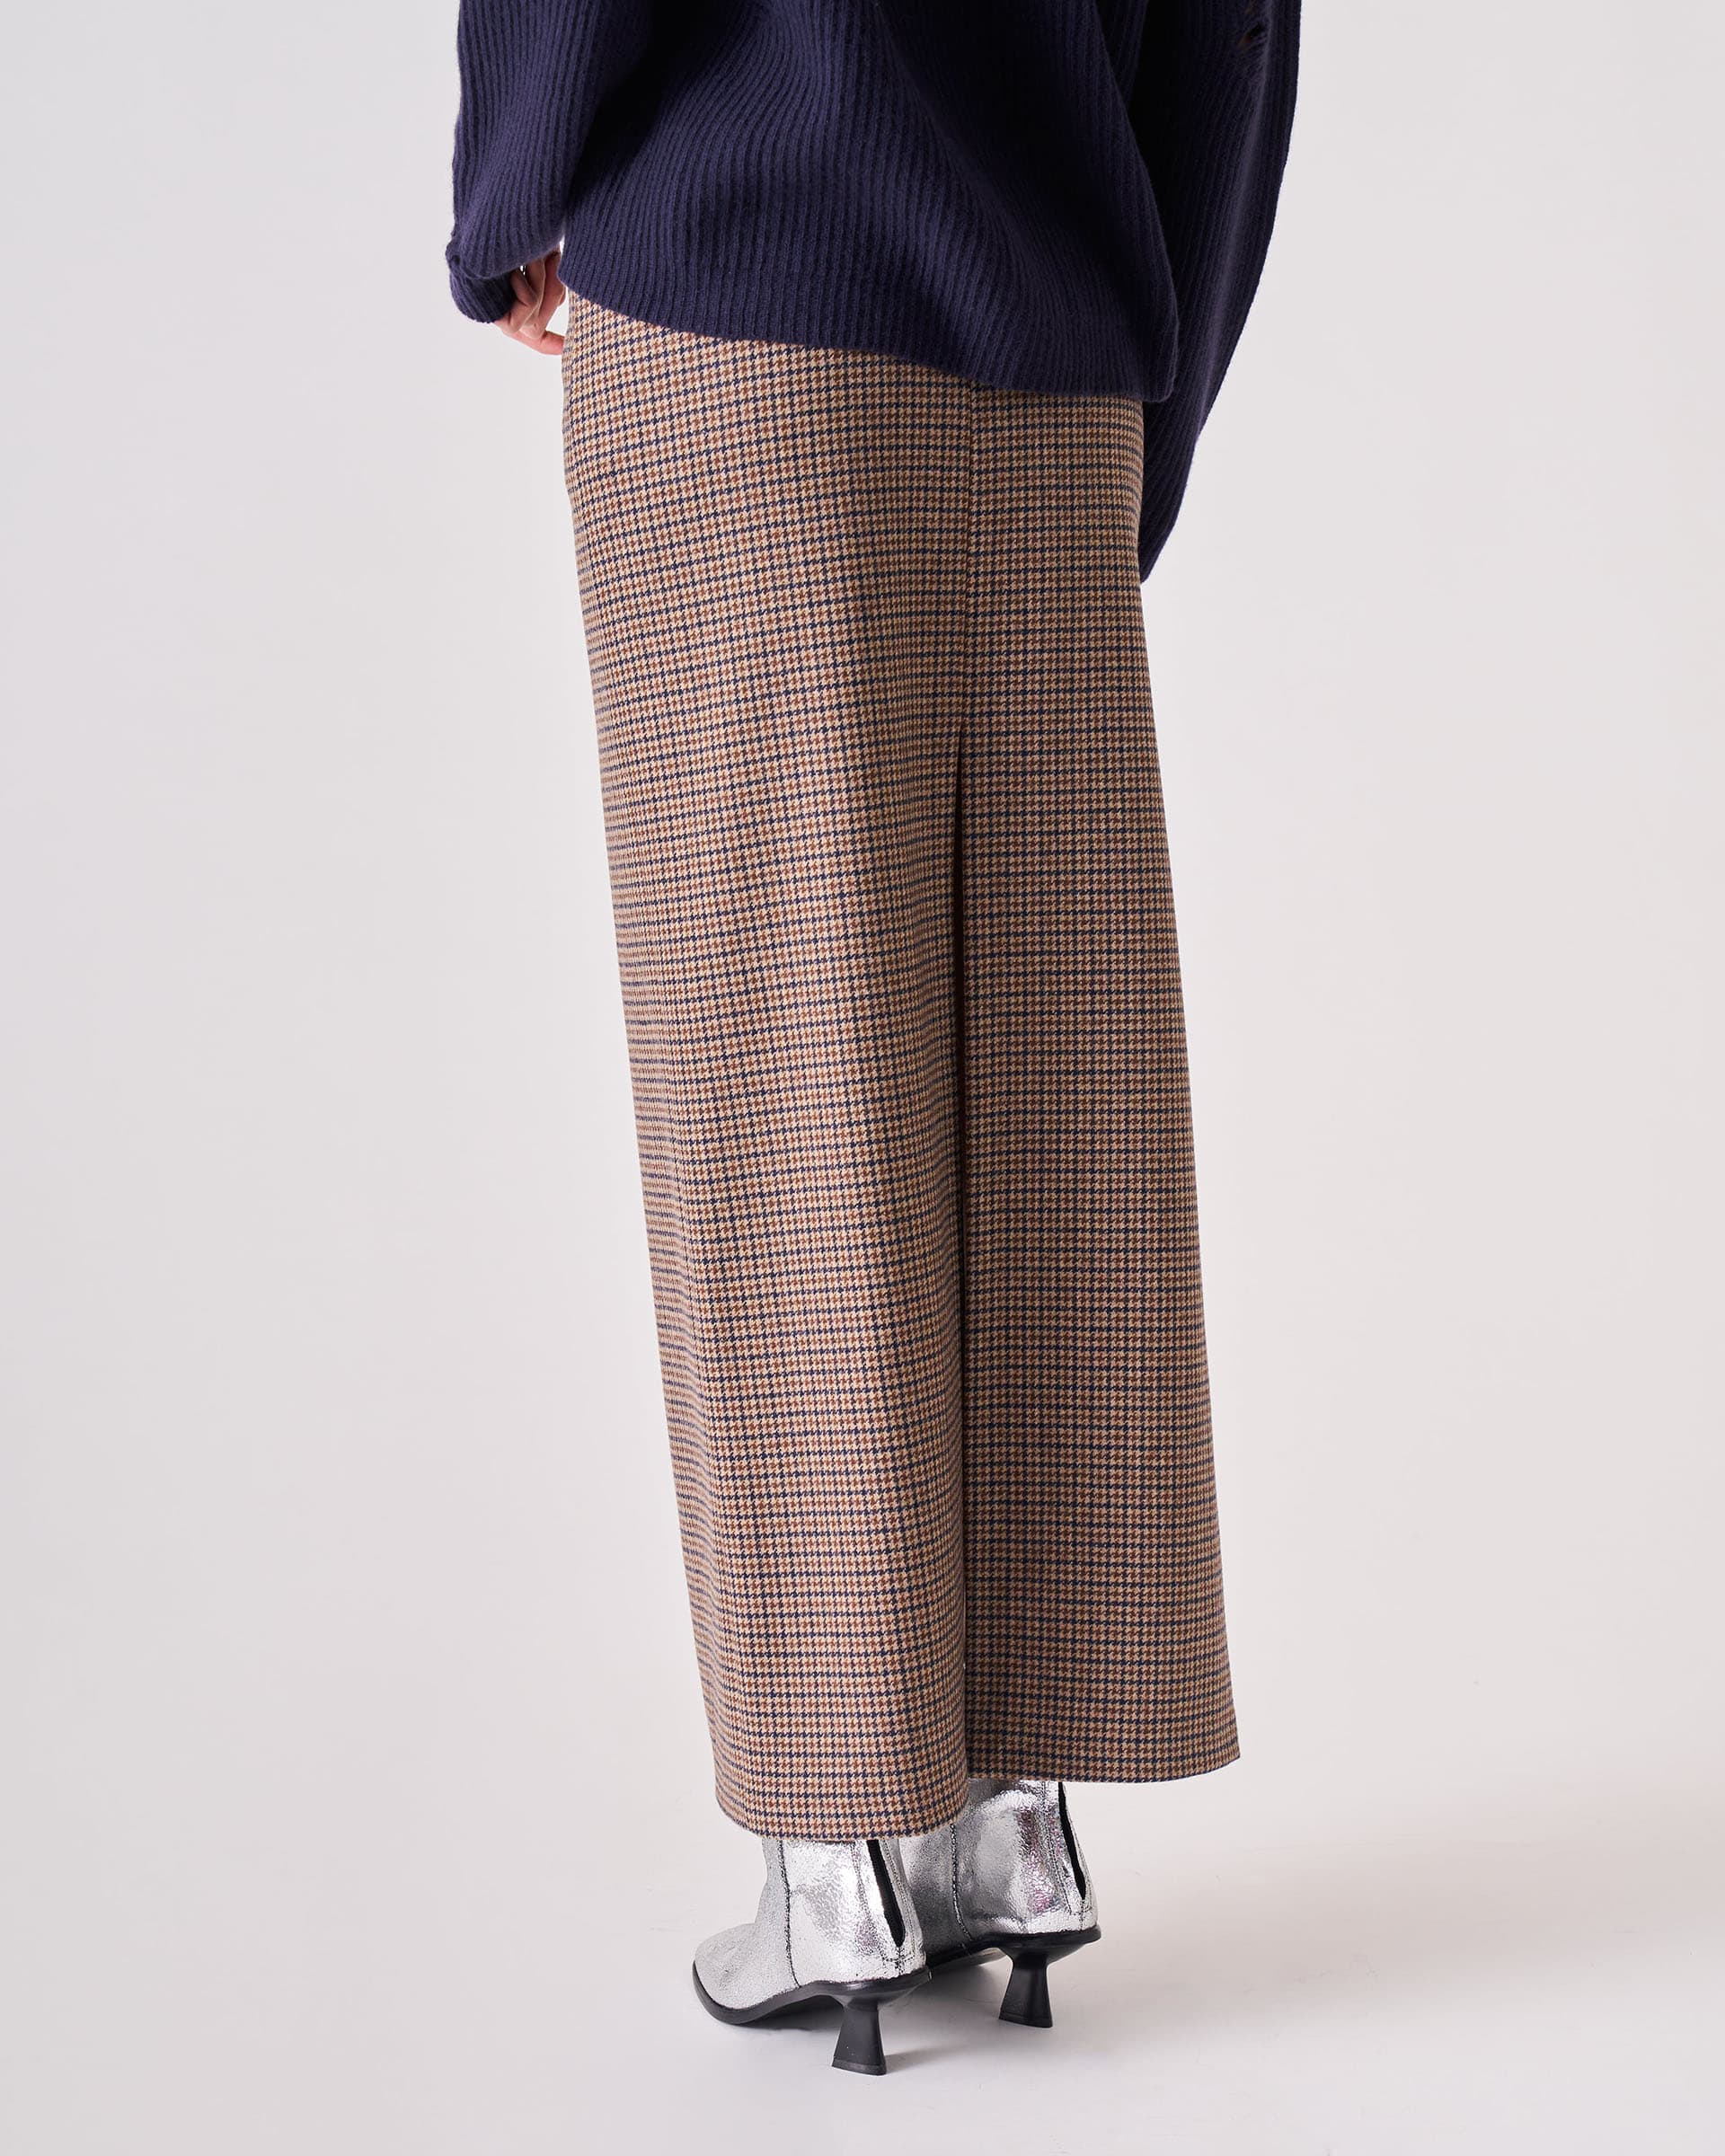 The Market Store | Checked Skirt